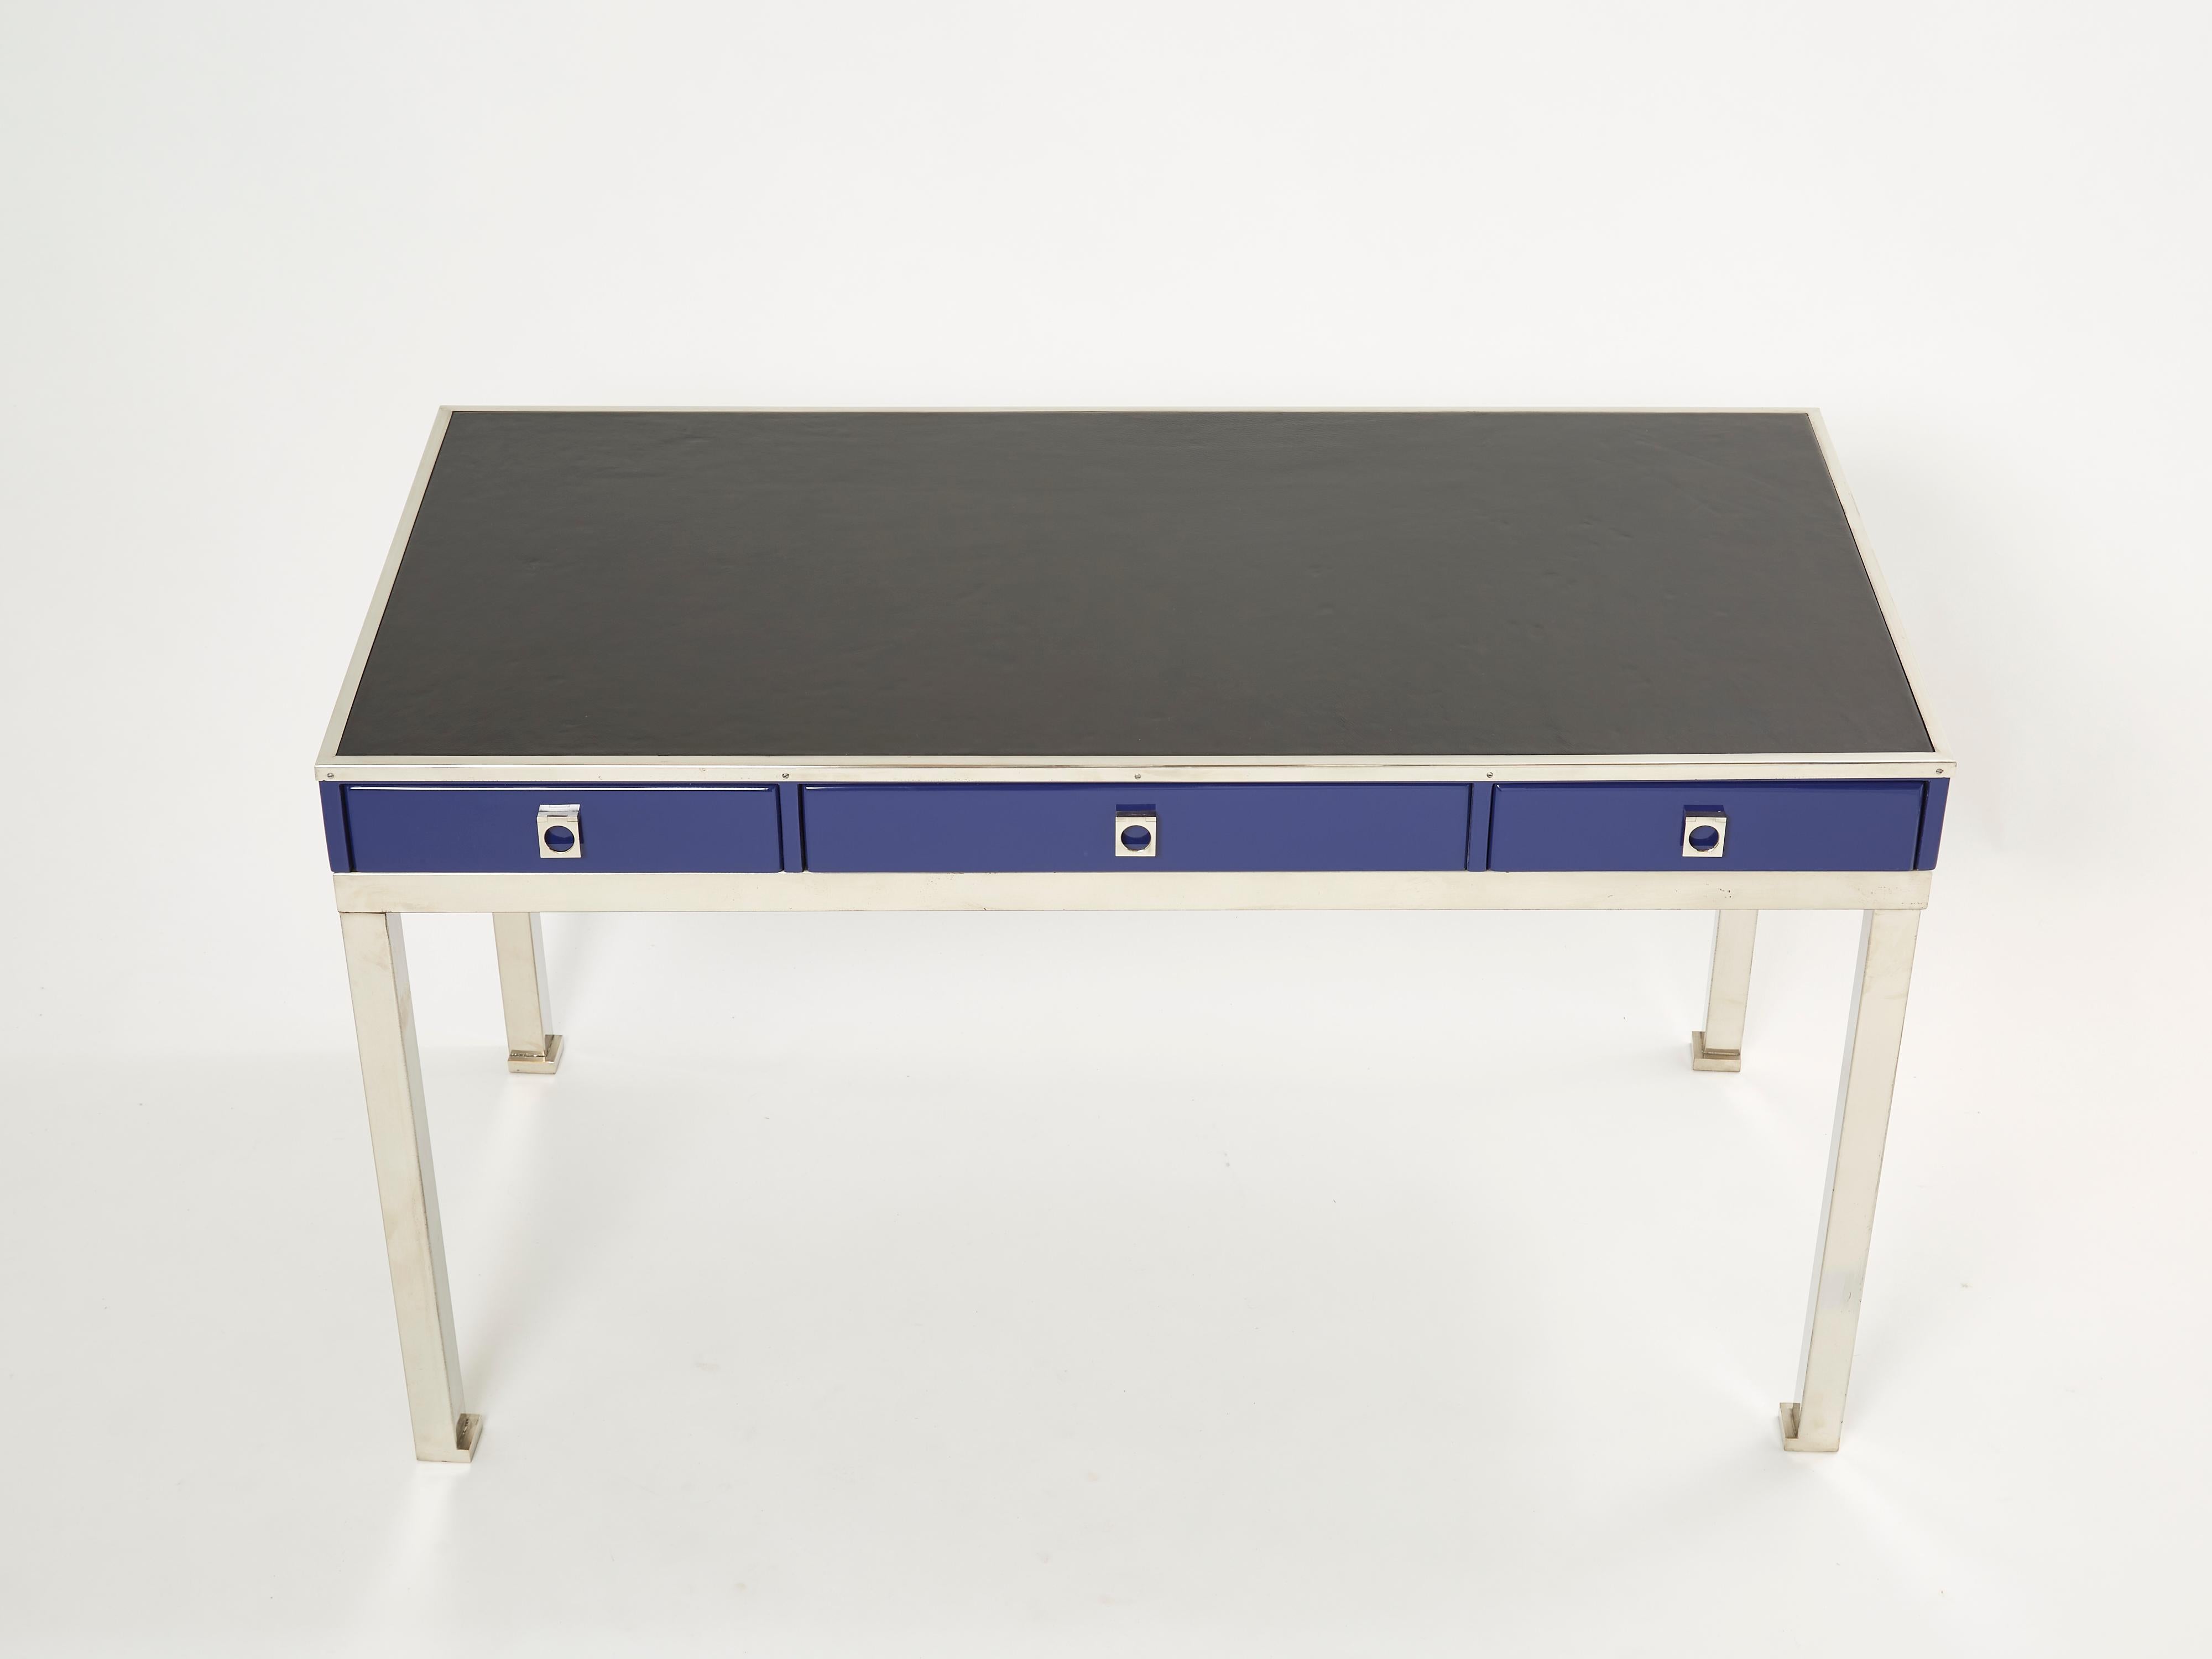 A rare Maison Jansen blue lacquered desk table designed by Guy Lefevre, it features a simple side black leather top surface and three drawers. Following the glamorous French Mid-century look of other Classic Guy Lefevre designs, this beautiful desk